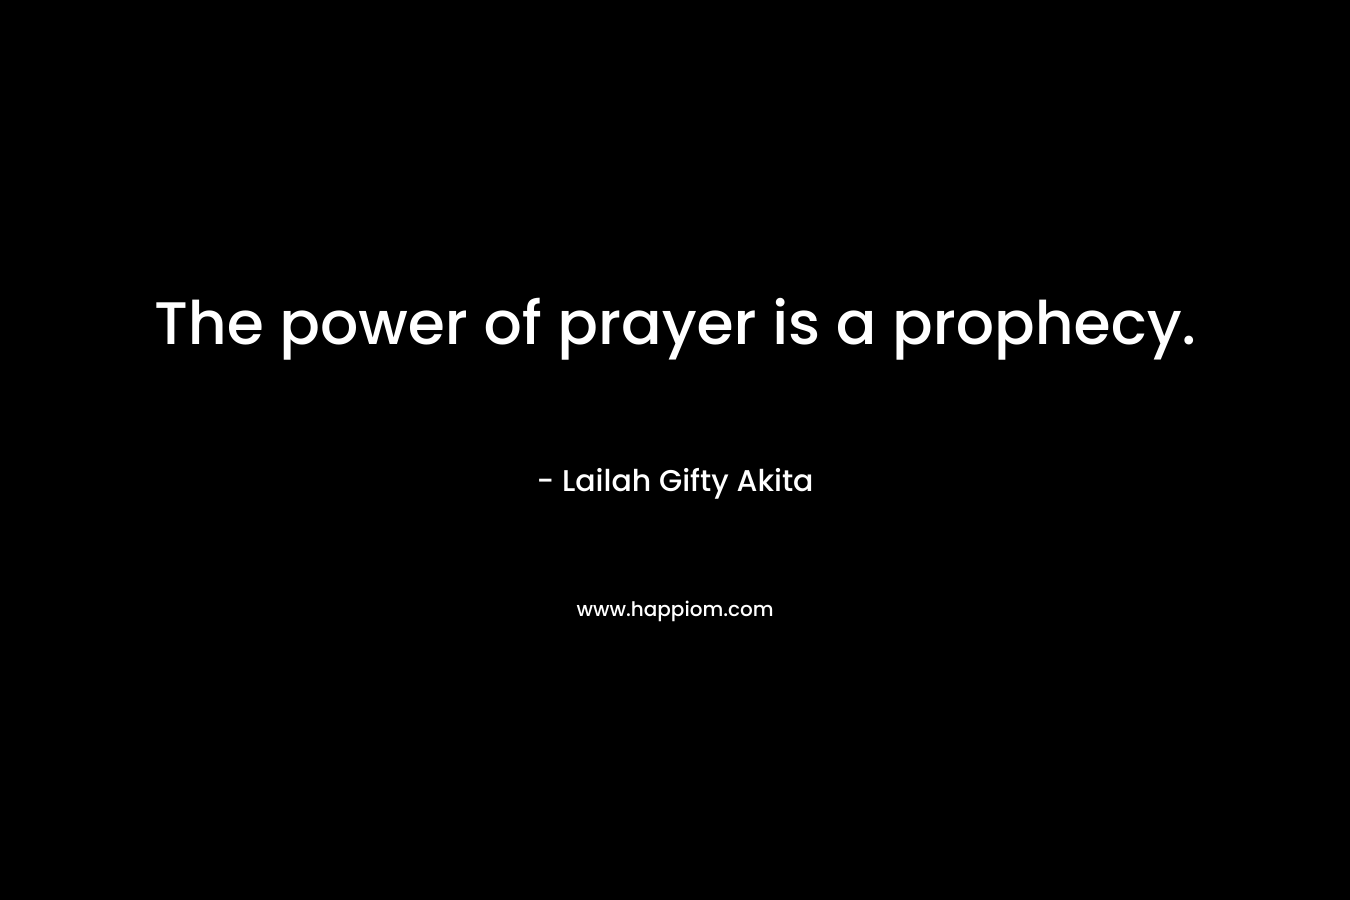 The power of prayer is a prophecy.